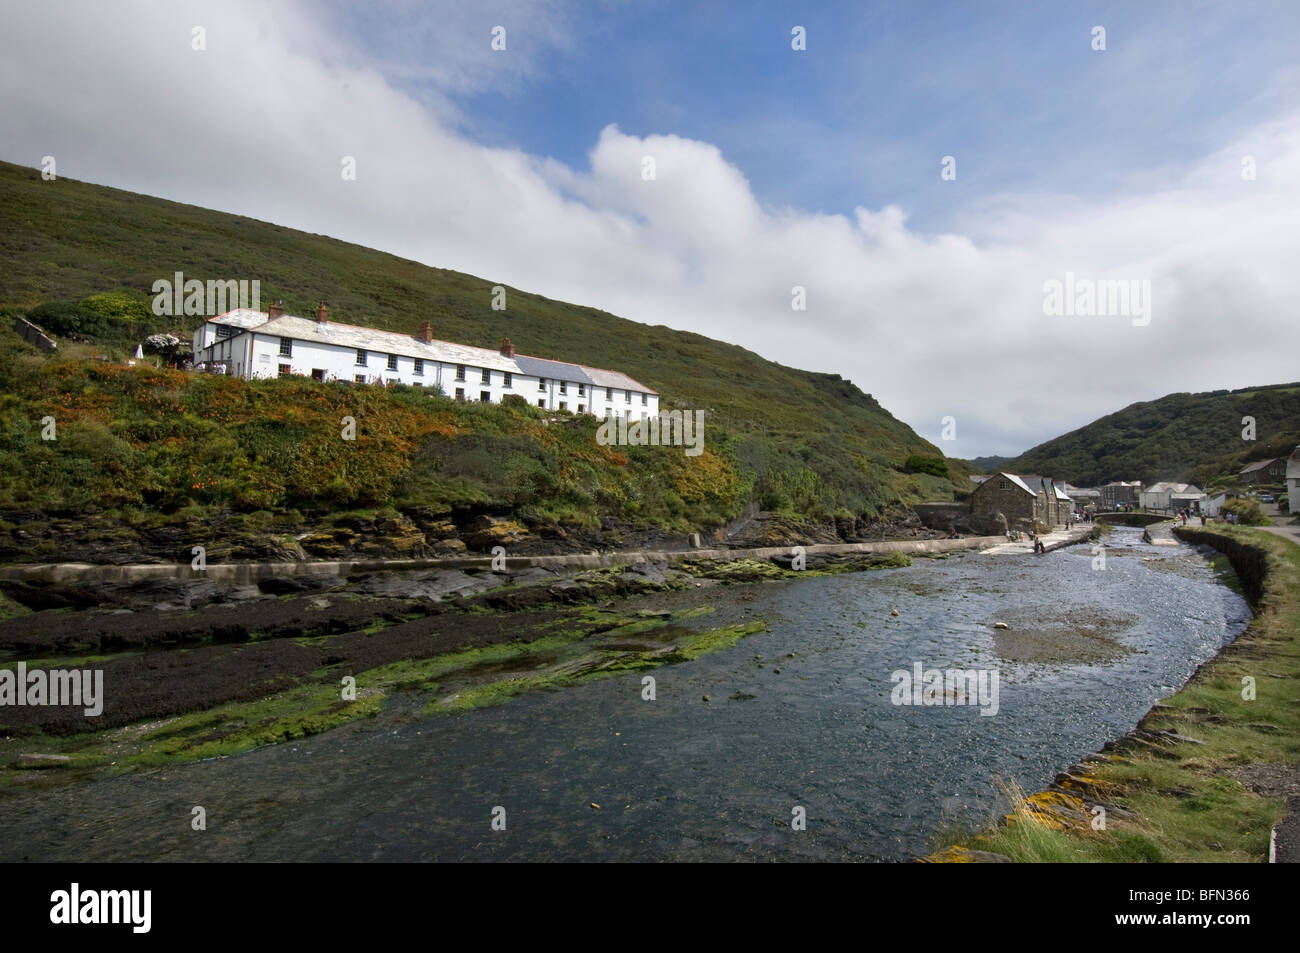 A row of terraced cottages at Boscastle near Wadebridge, North Cornwall. Stock Photo